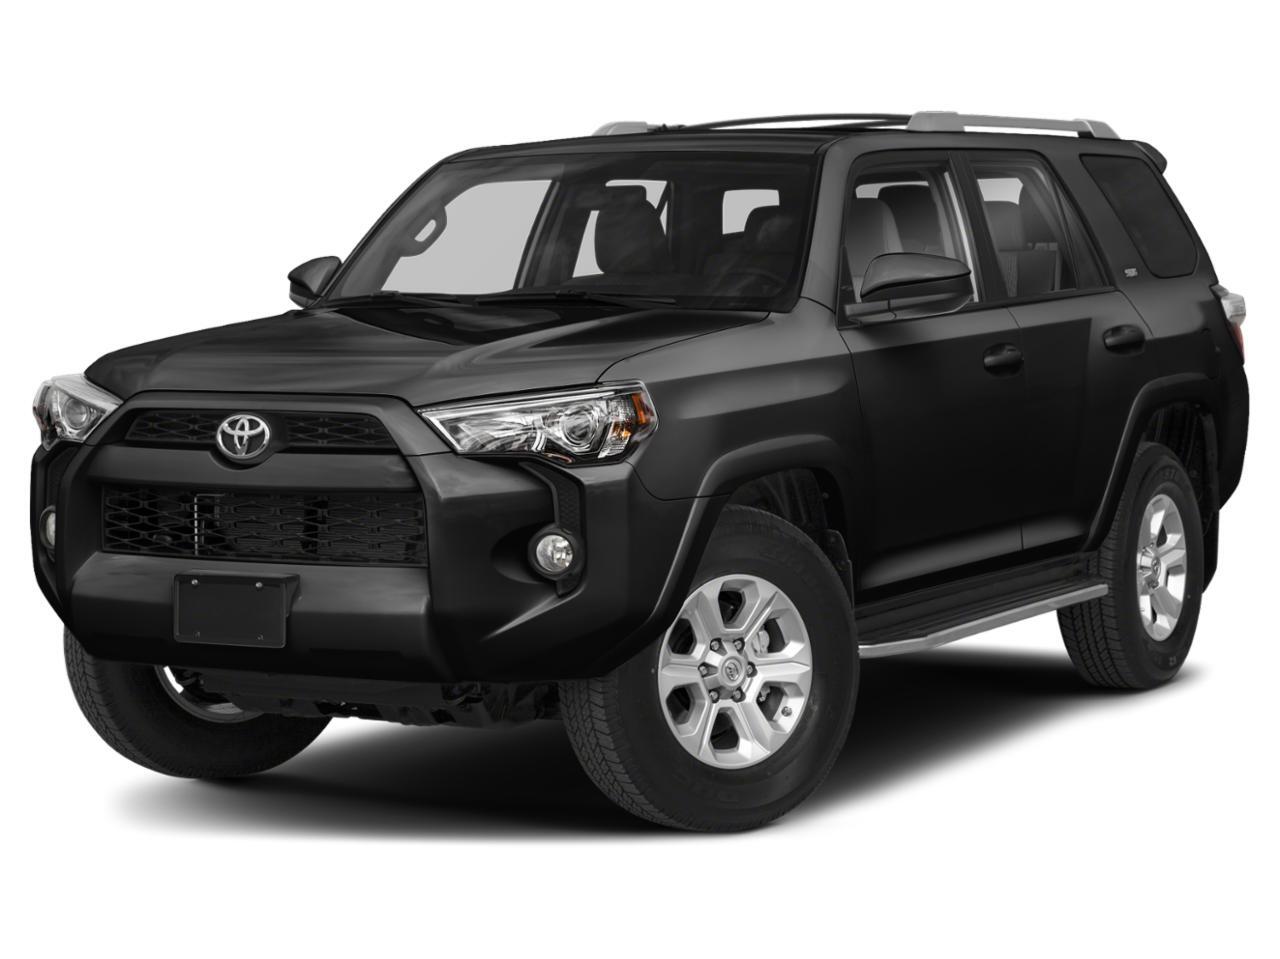 2018 Toyota 4Runner 4WD Limited, Leather, 20" Alloys, Nav